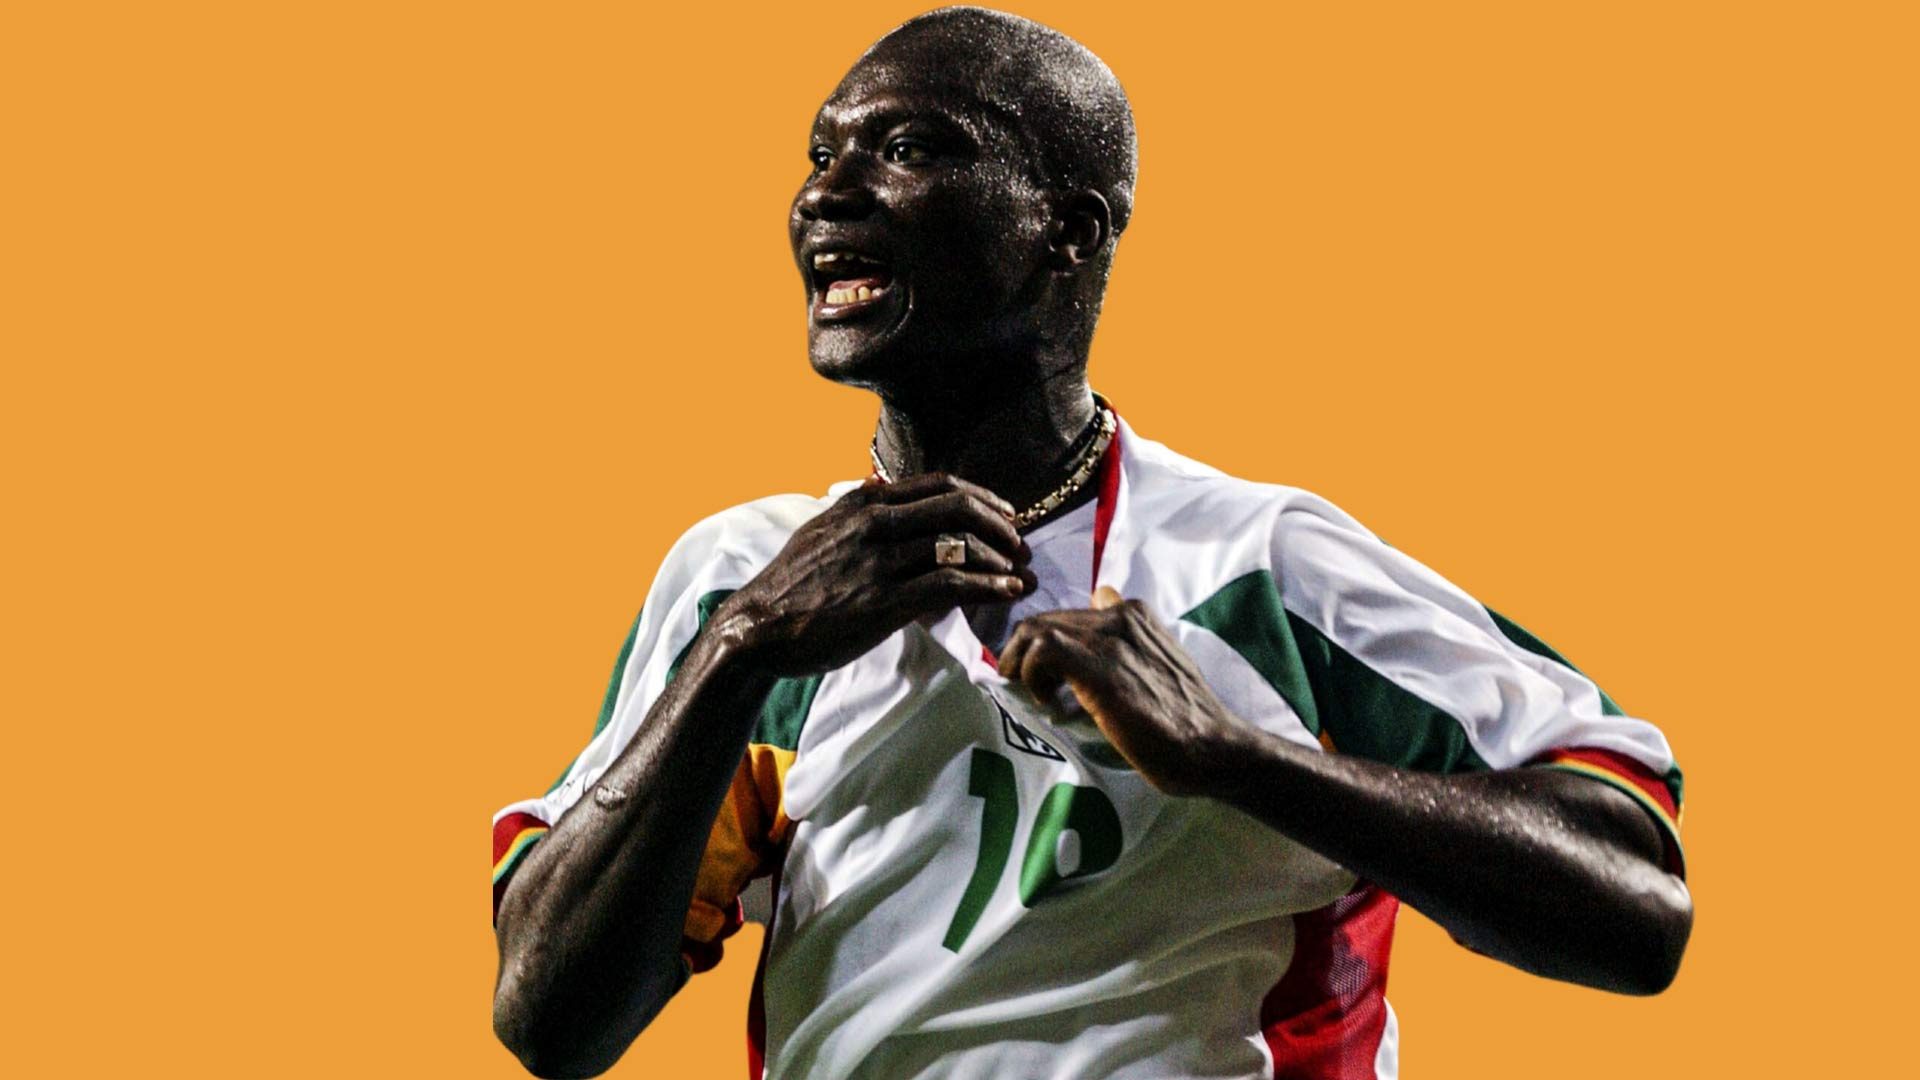 Papa Bouba Diop celebrating for Senegal at the 2002 World Cup. It's nicer to pretend he was the player we signed from that team and not El-Hadji Diouf